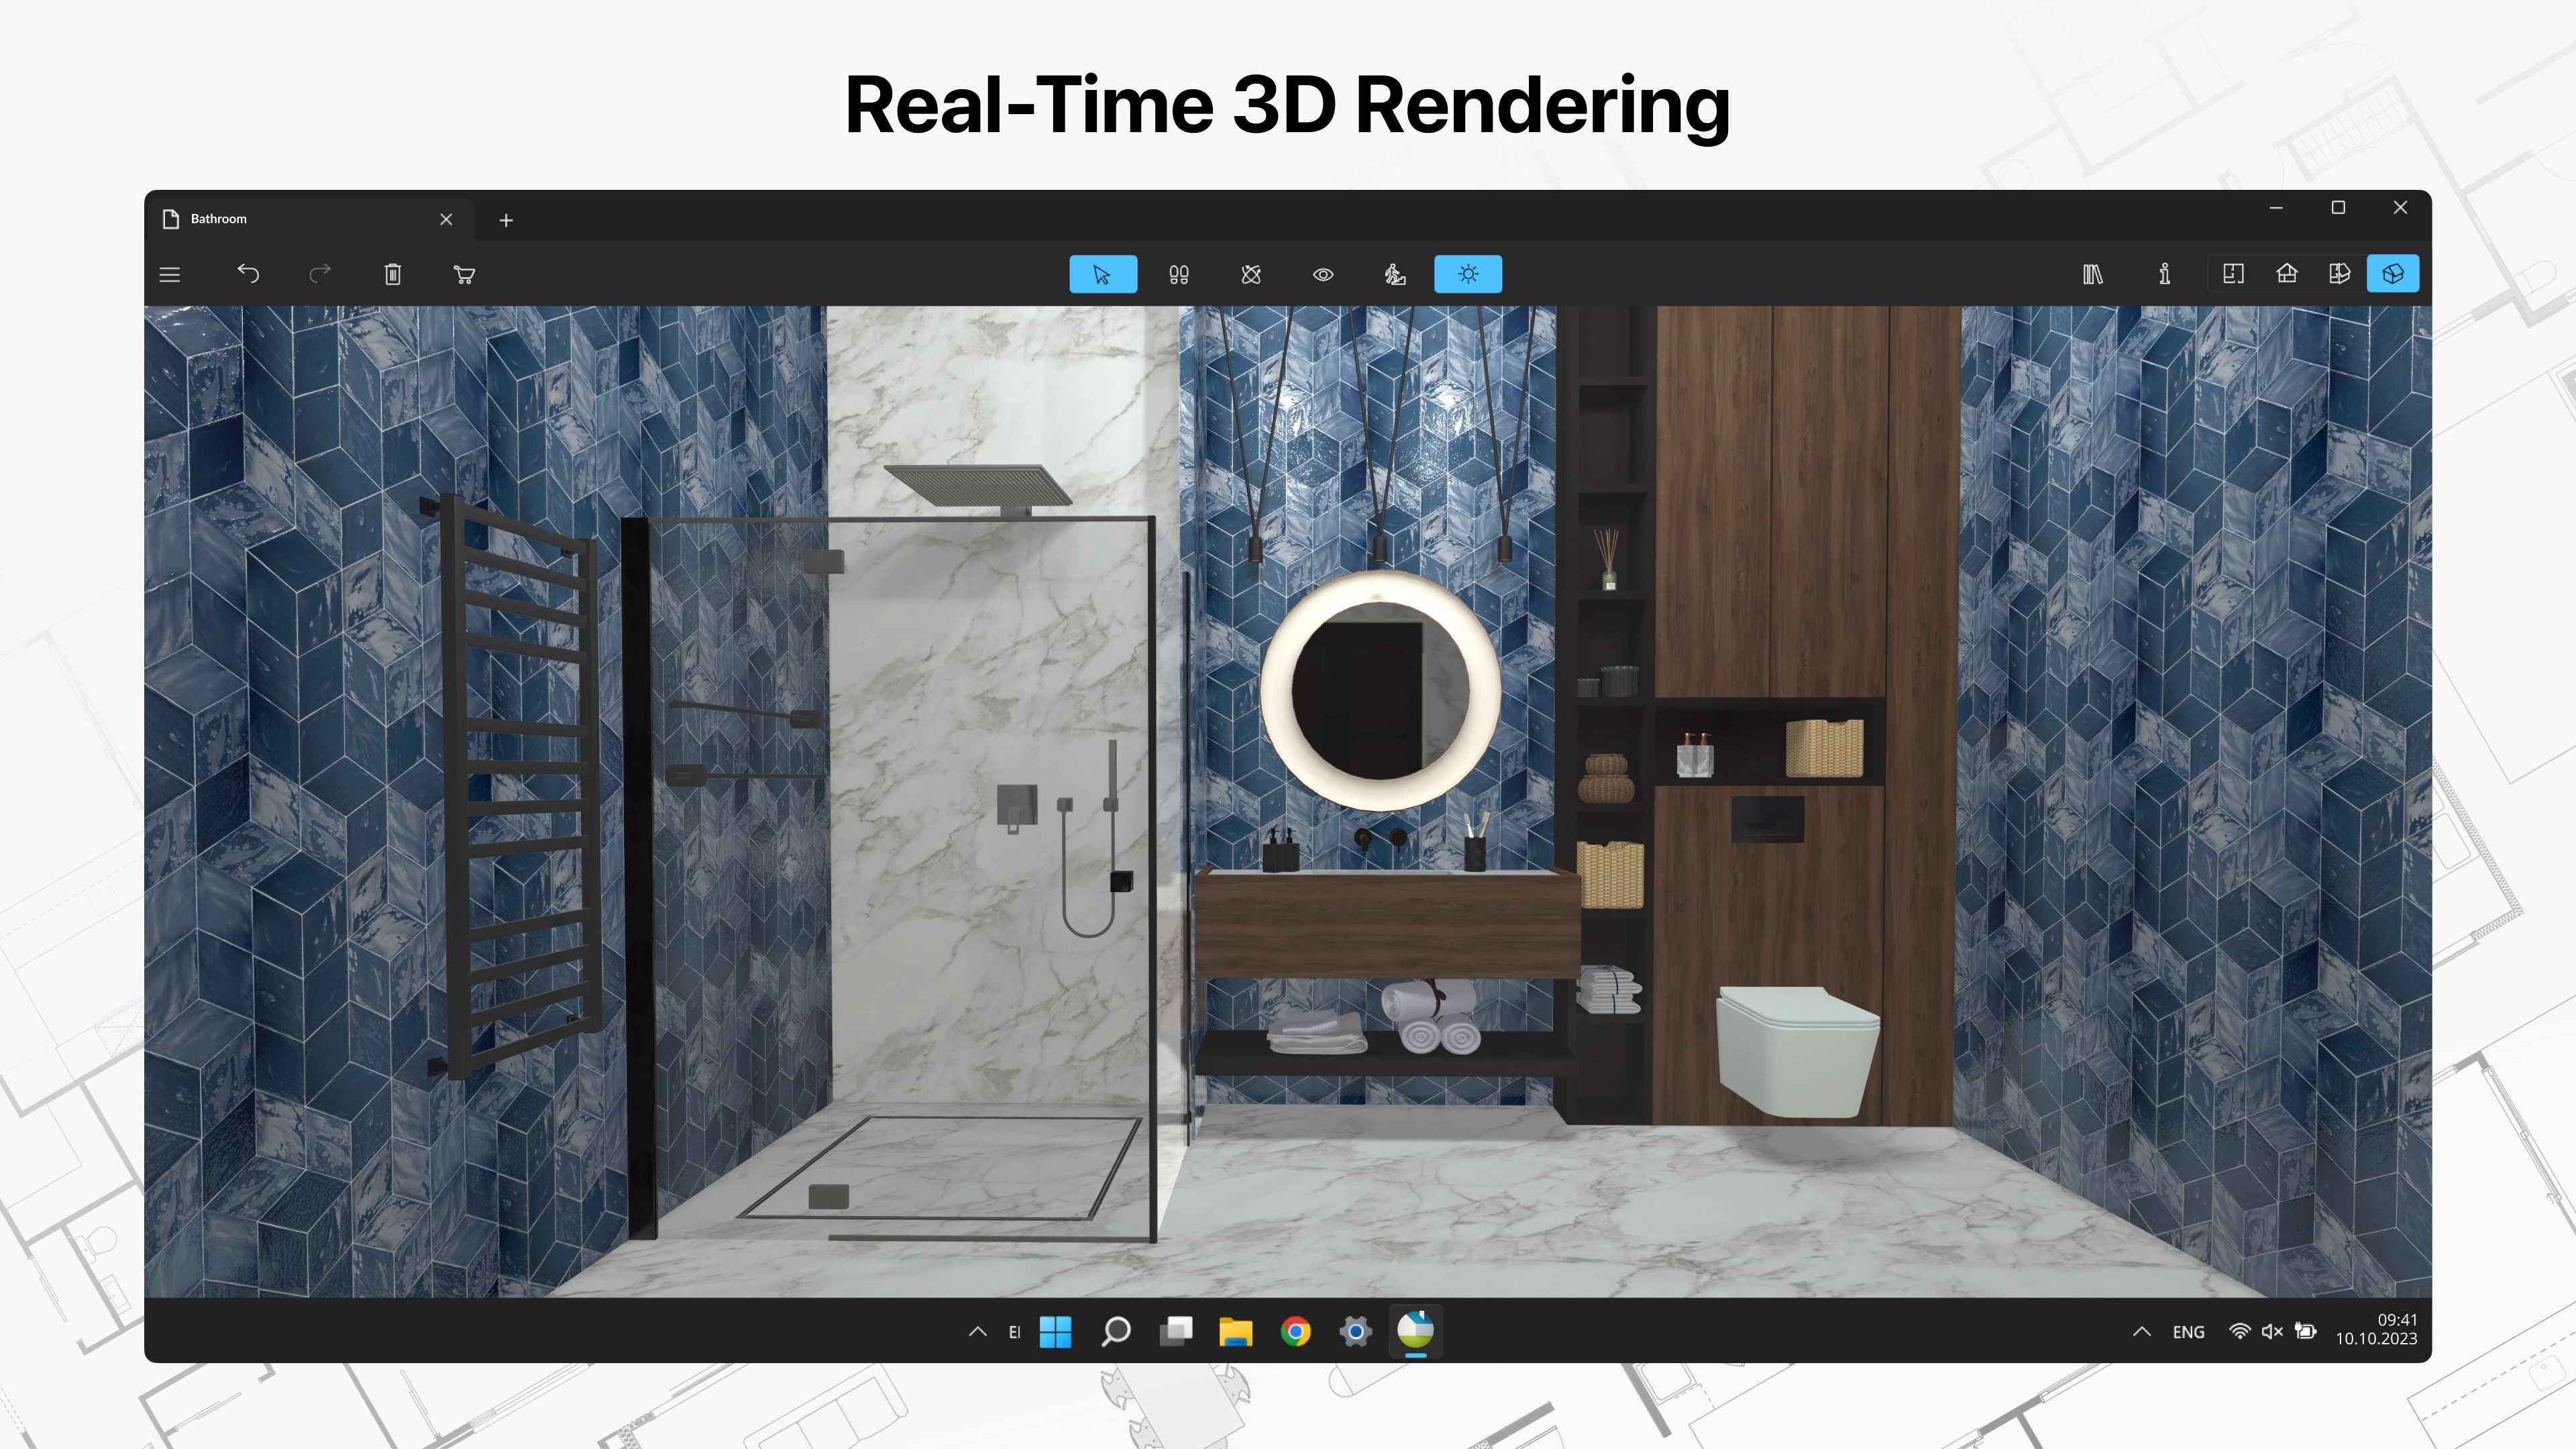 Real-Time 3D Rendering